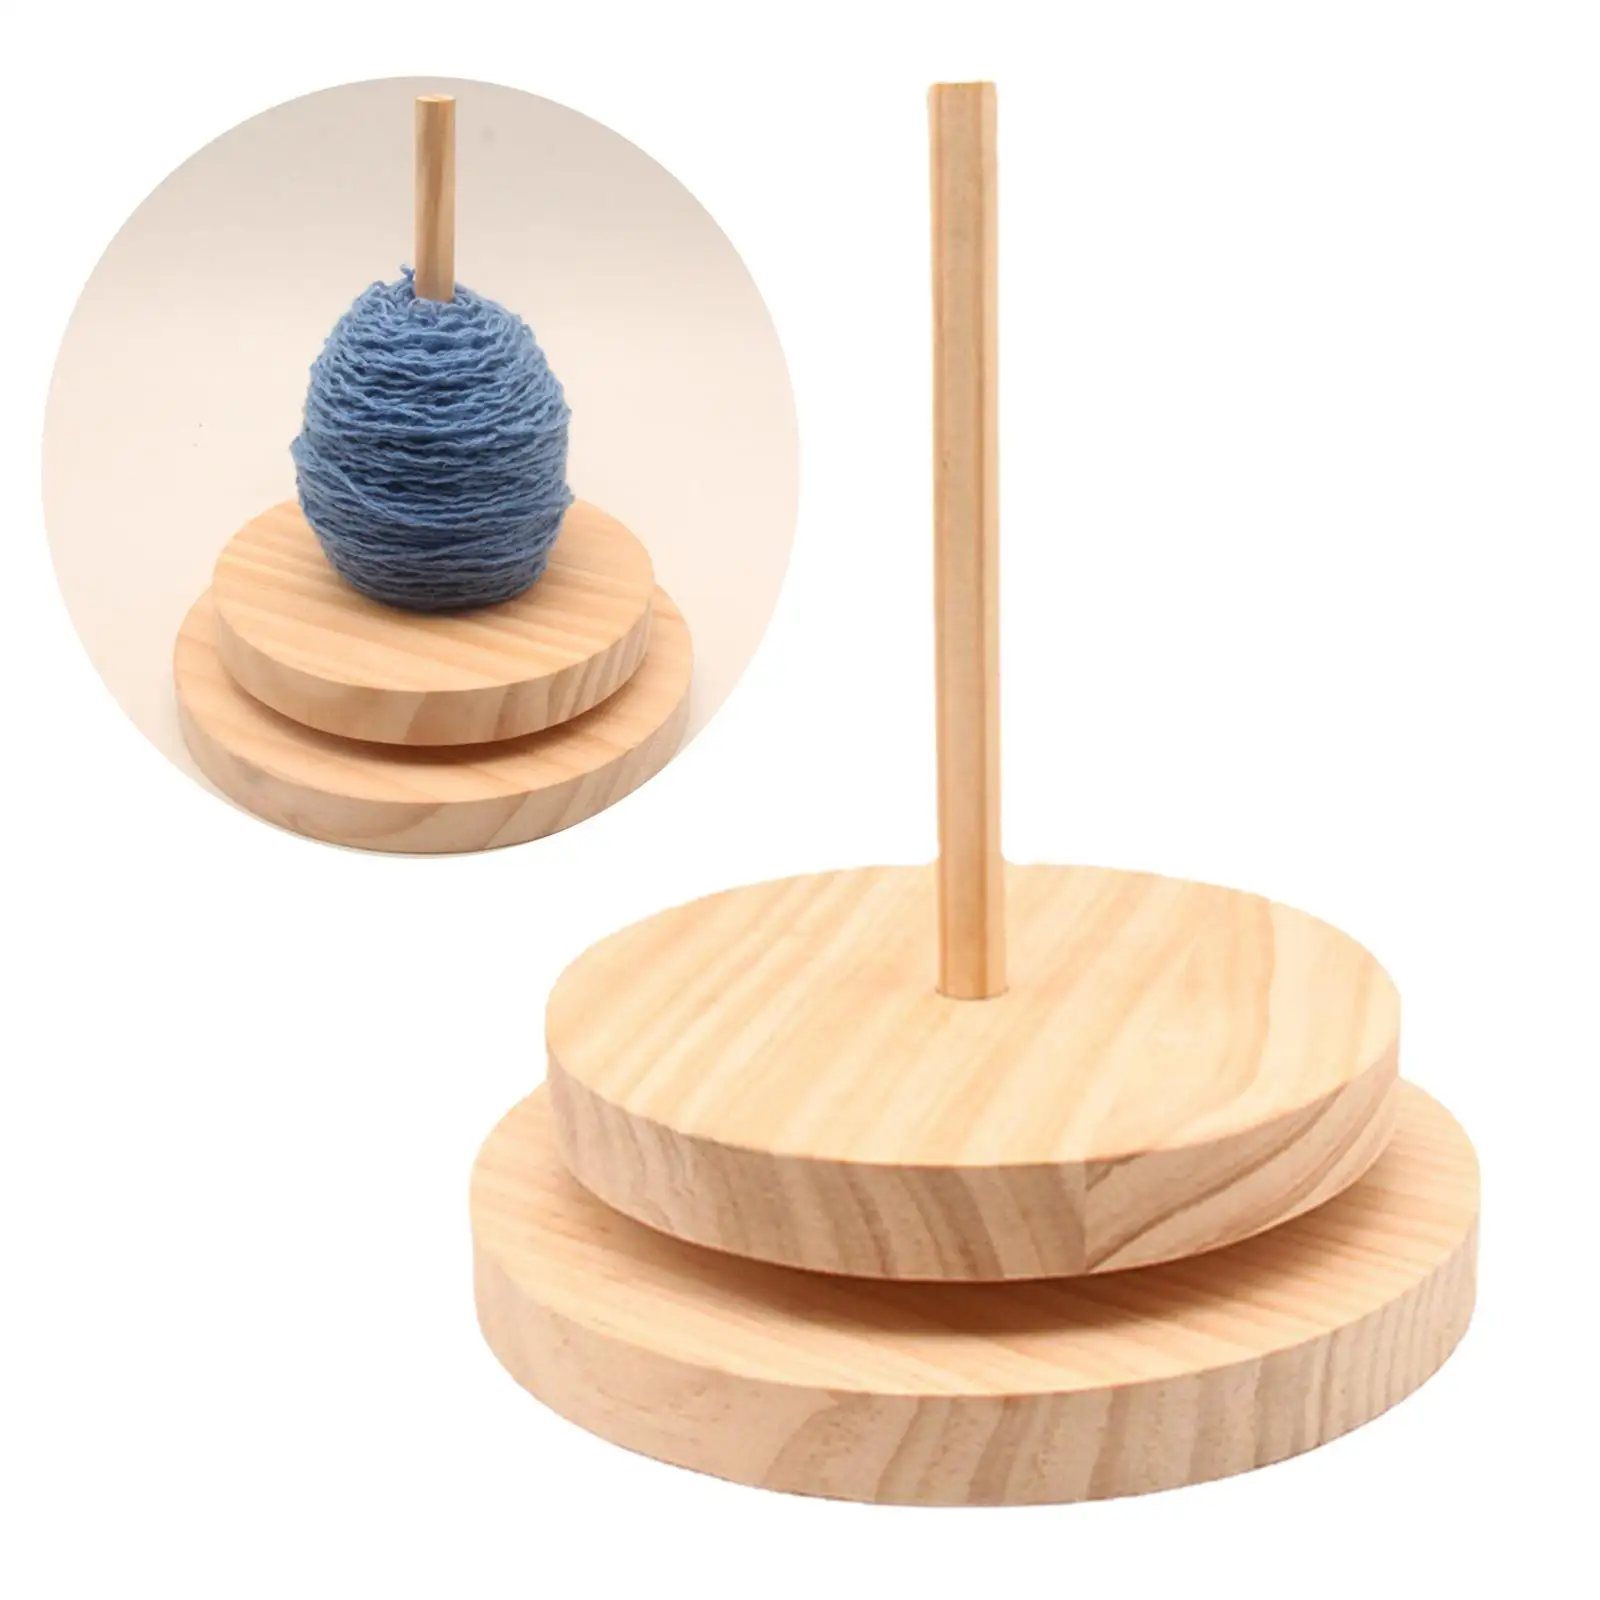 Wooden Yarn Ball Holder Thread Spool Crocheting Sewing Knitting Tools Stand Rope Storage Winder Rotation Spinning